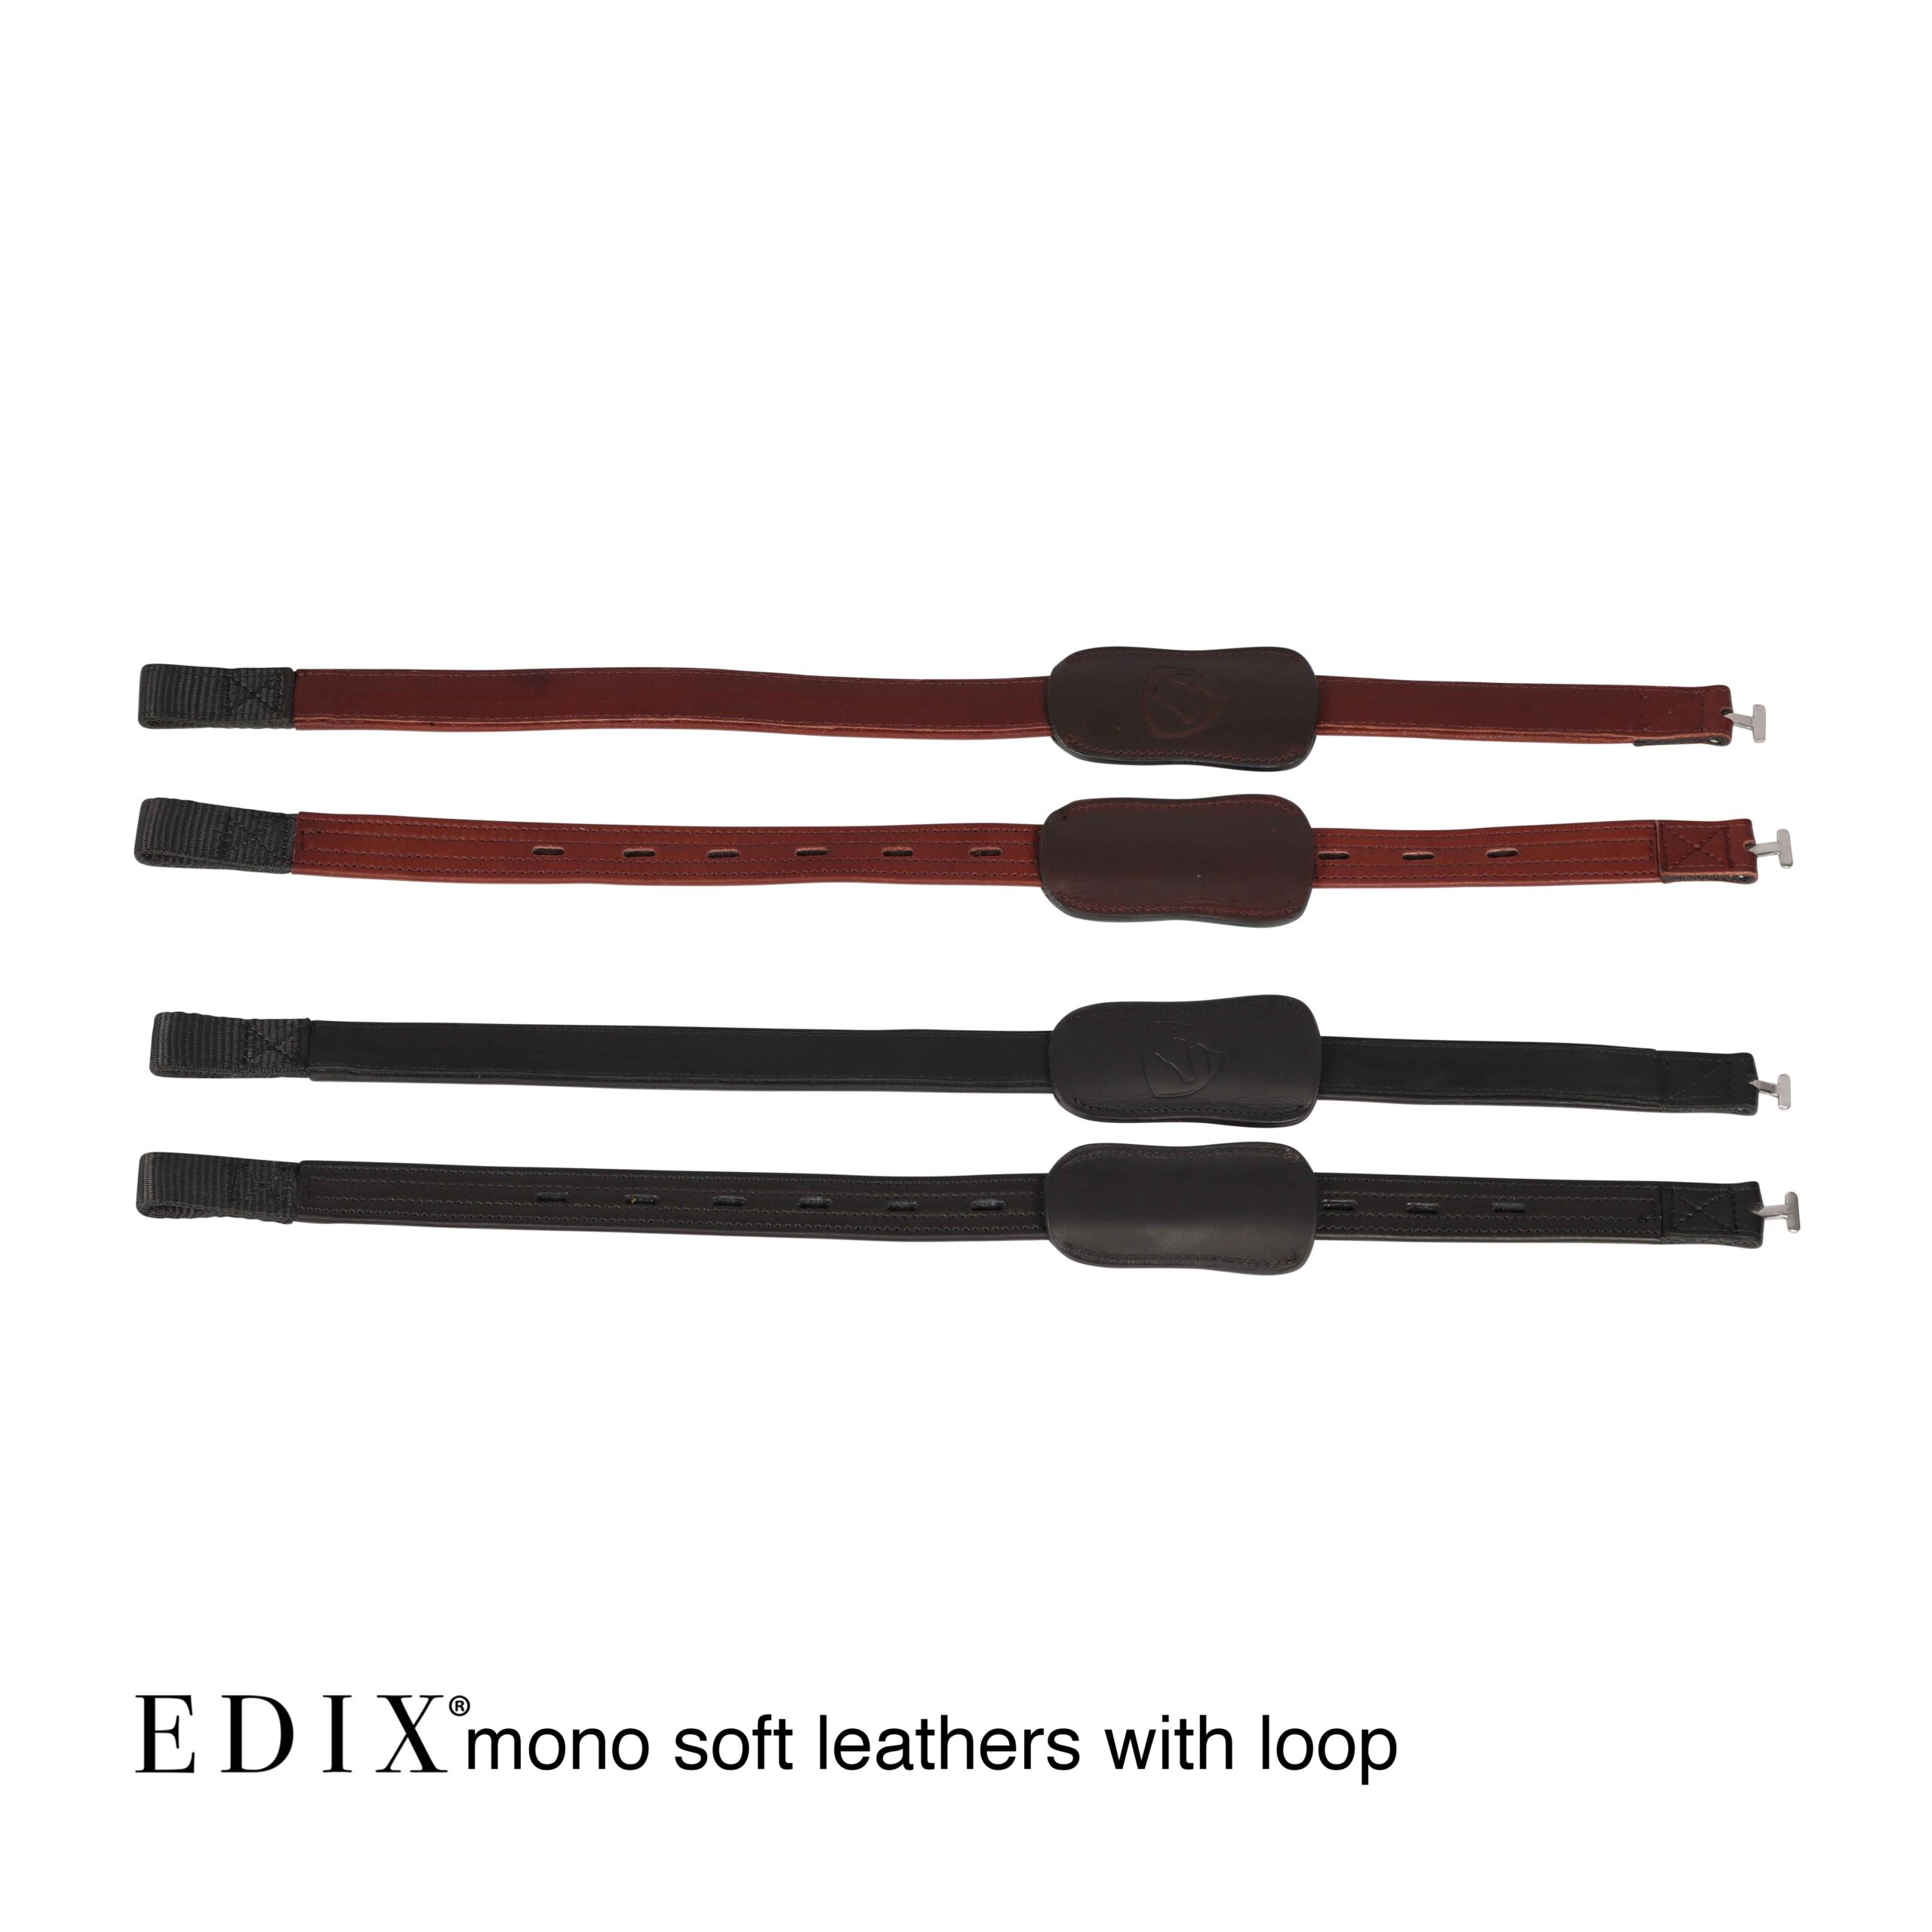 EDIX mono stirrup leathers of soft leather with loop and T-bar